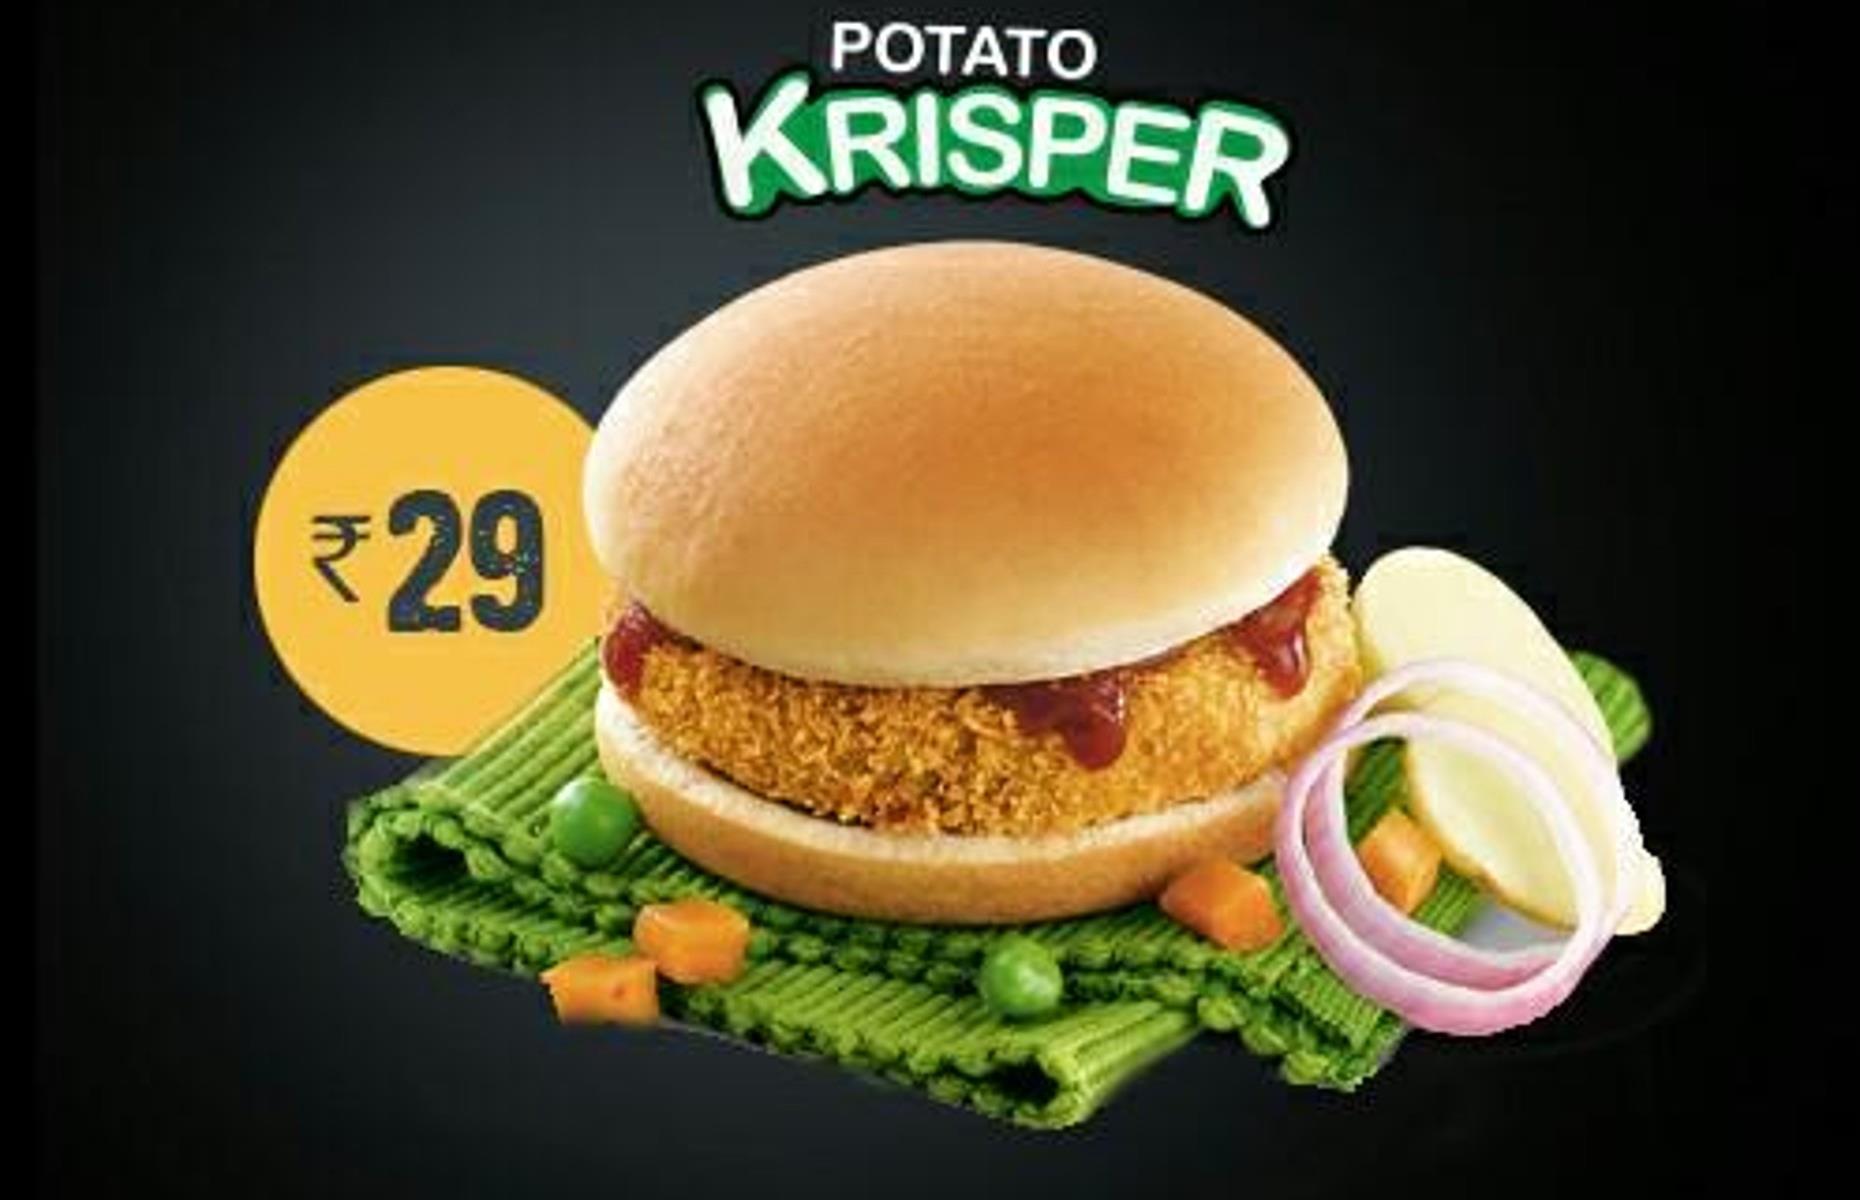 <p>When KFC moved into the Indian market, the chain adapted its menu to suit local dietary requirements. With a large proportion of the country’s population eating a vegetarian diet, KFC introduced an entire meat-free menu. Available in 2014, the Potato Krisper featured a crispy potato patty, sauce and onions in a bun. It was similar to the McDonald’s Aloo Tikki Burger, which is also sold in India. There's still a Veg Krisper on the menu.</p>